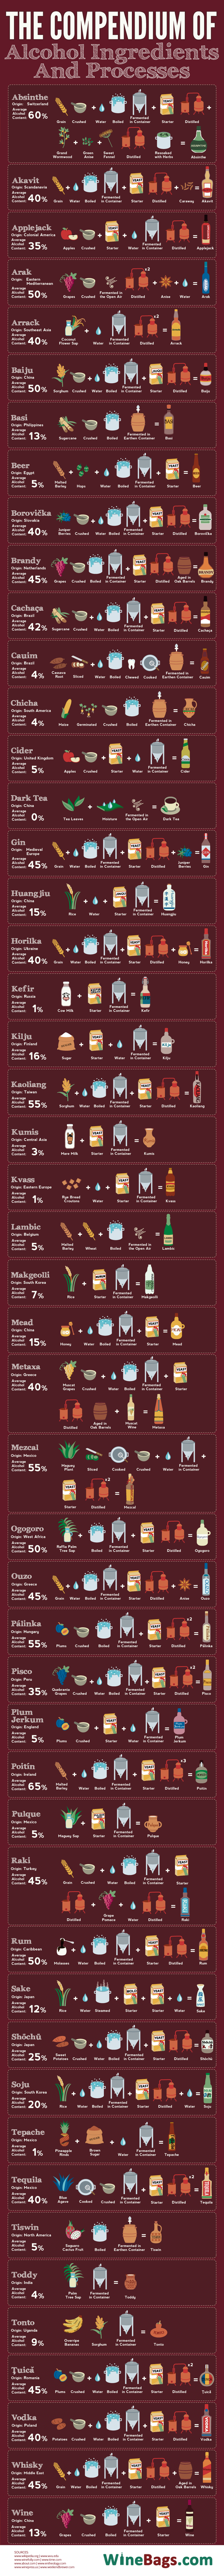 Alcoholingredients-infographic